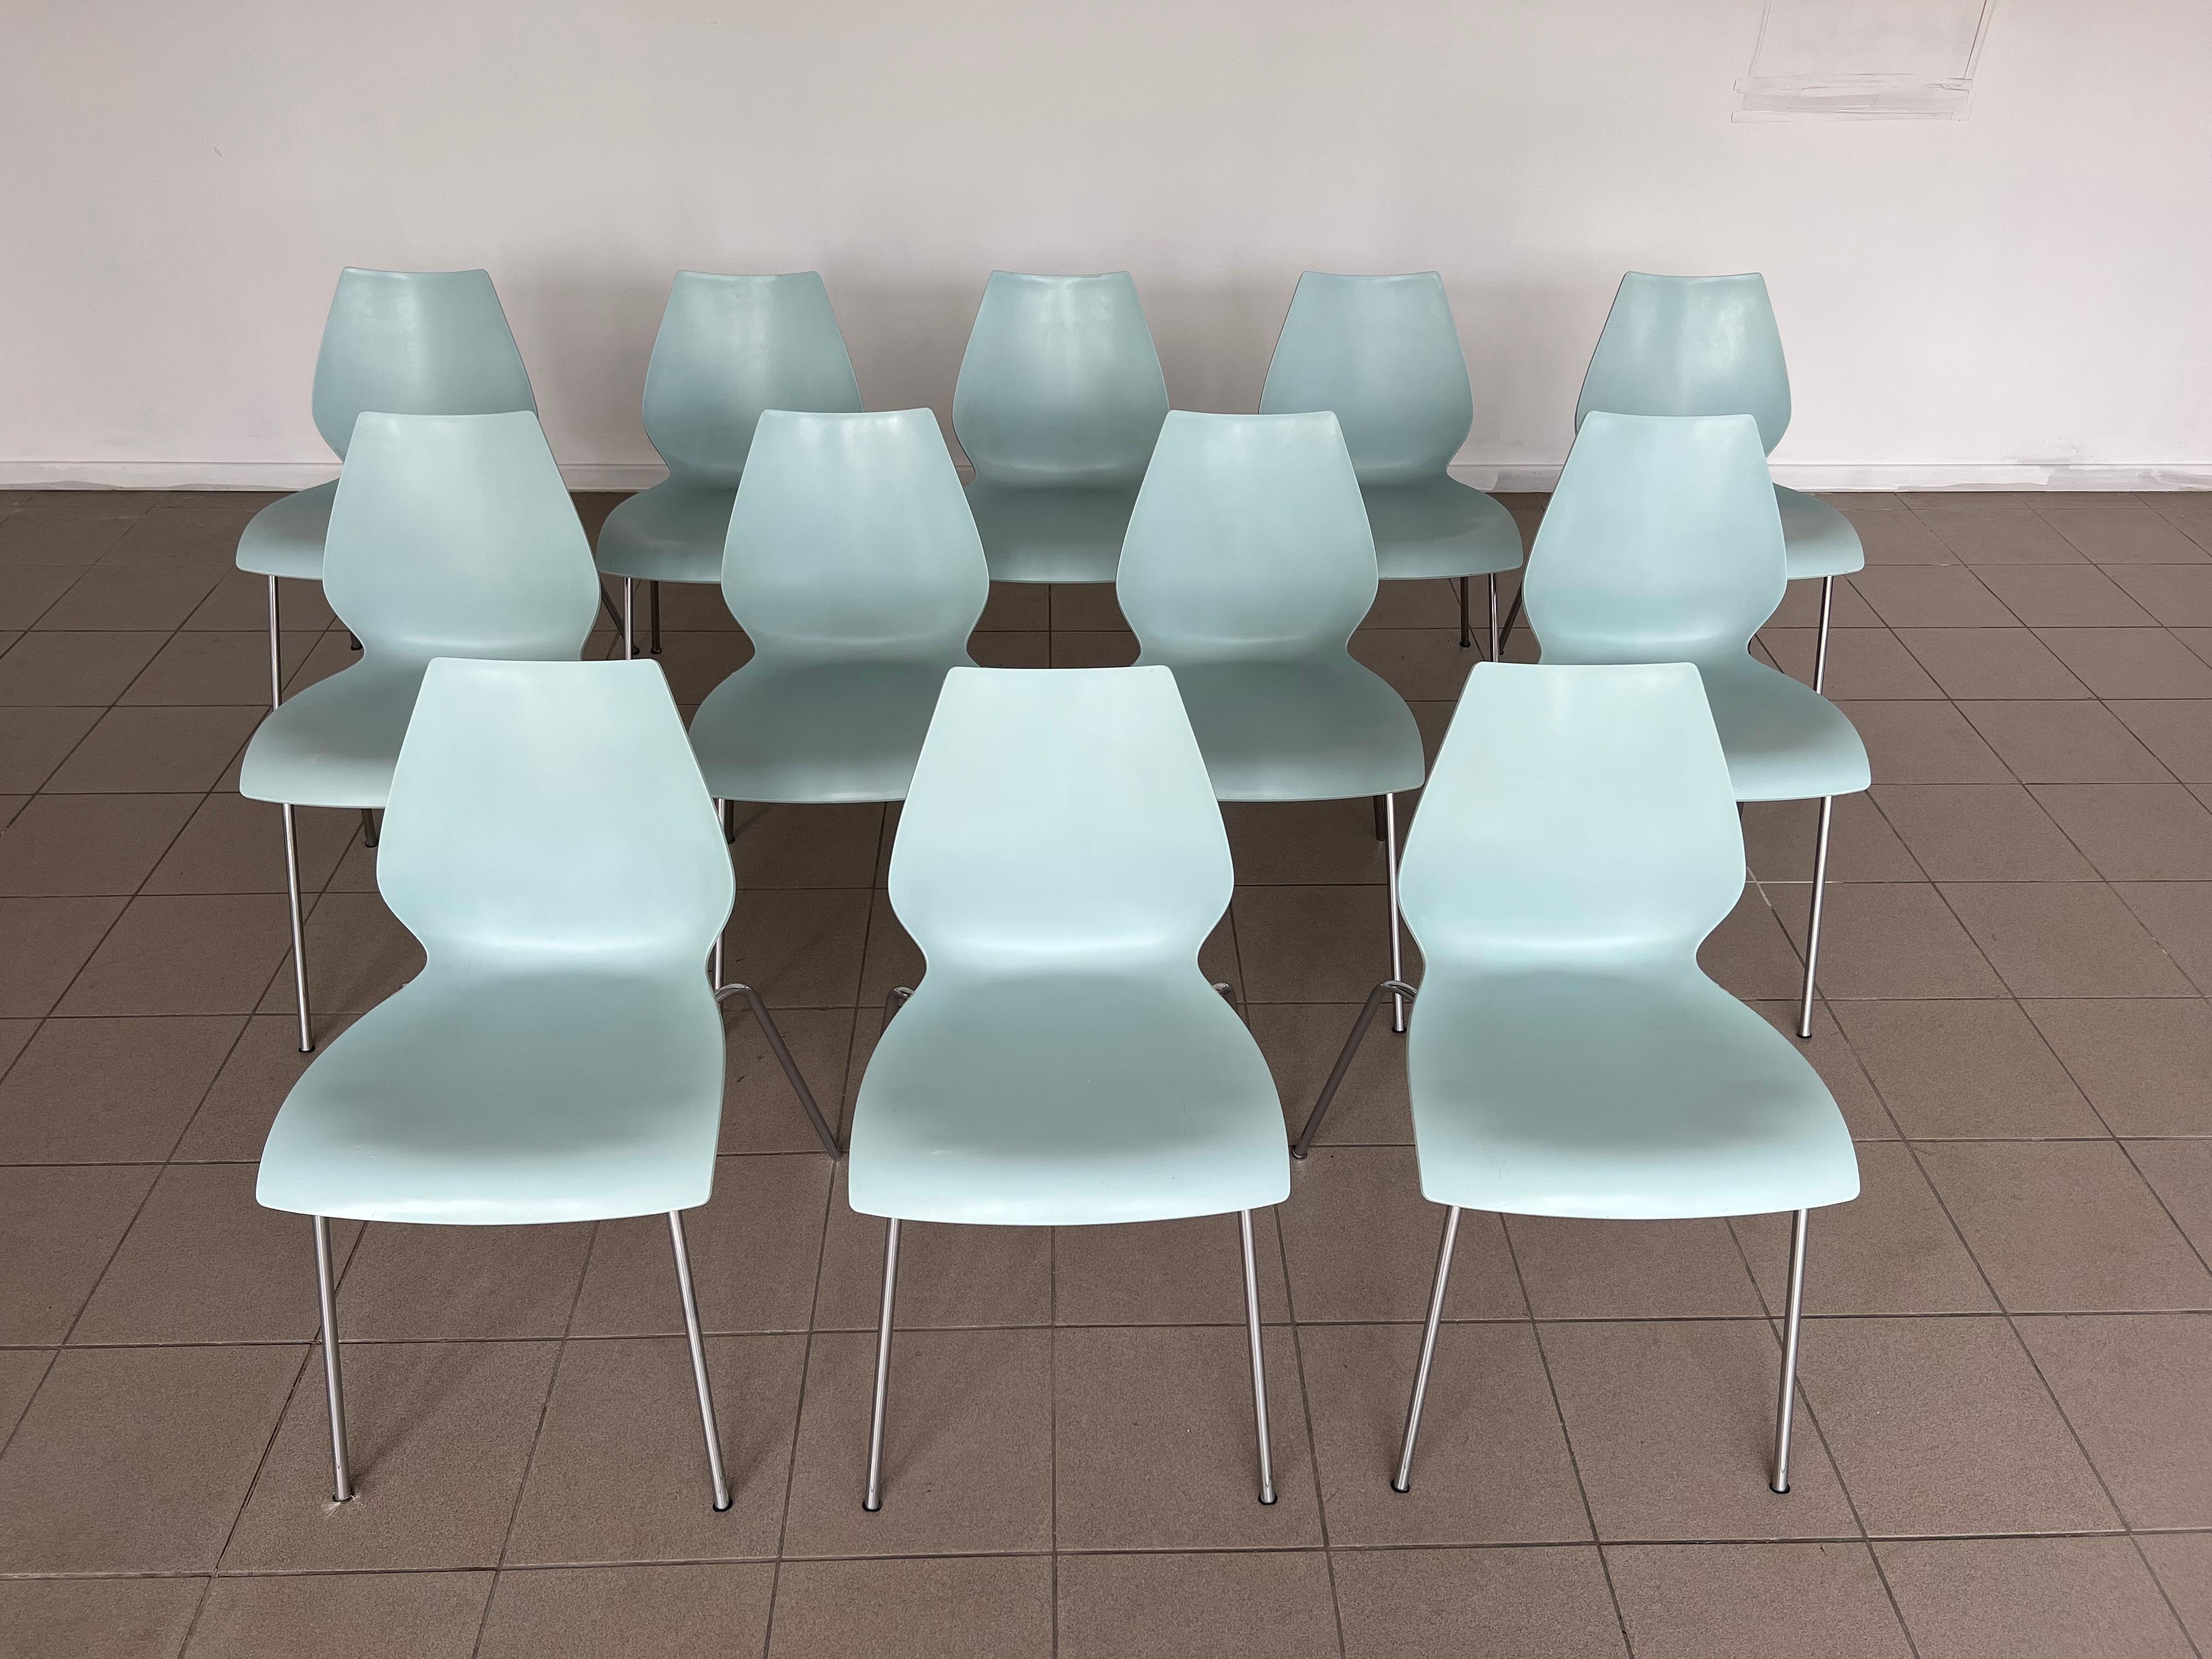 Italian Maui Pale Blue Side Chairs Vico Magistretti for Kartell - Set of 12 In Good Condition For Sale In Bridgeport, CT